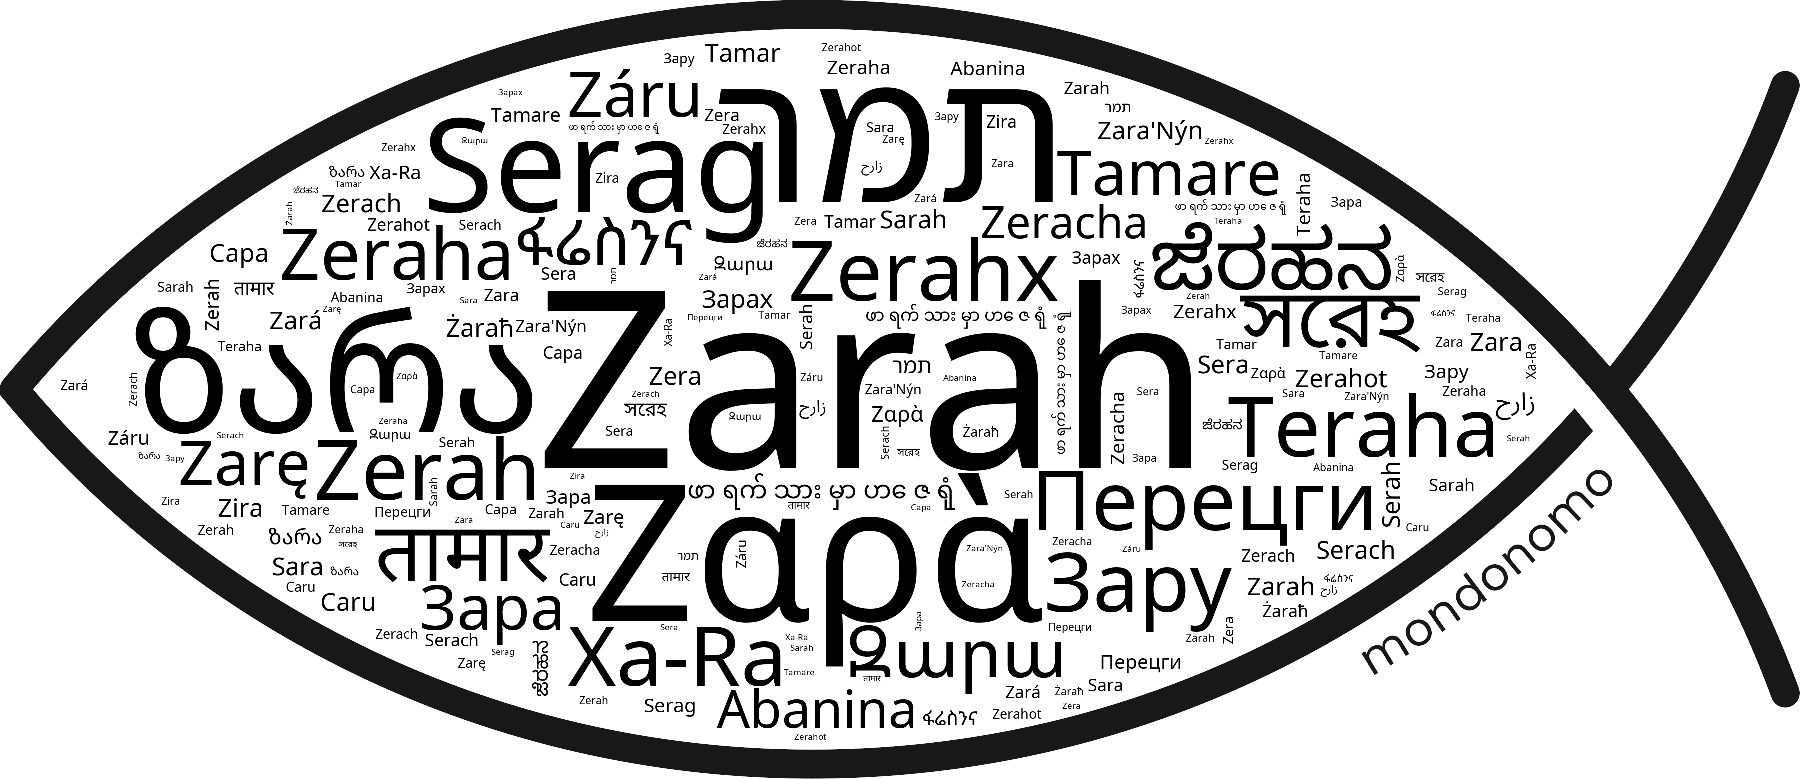 Name Zarah in the world's Bibles